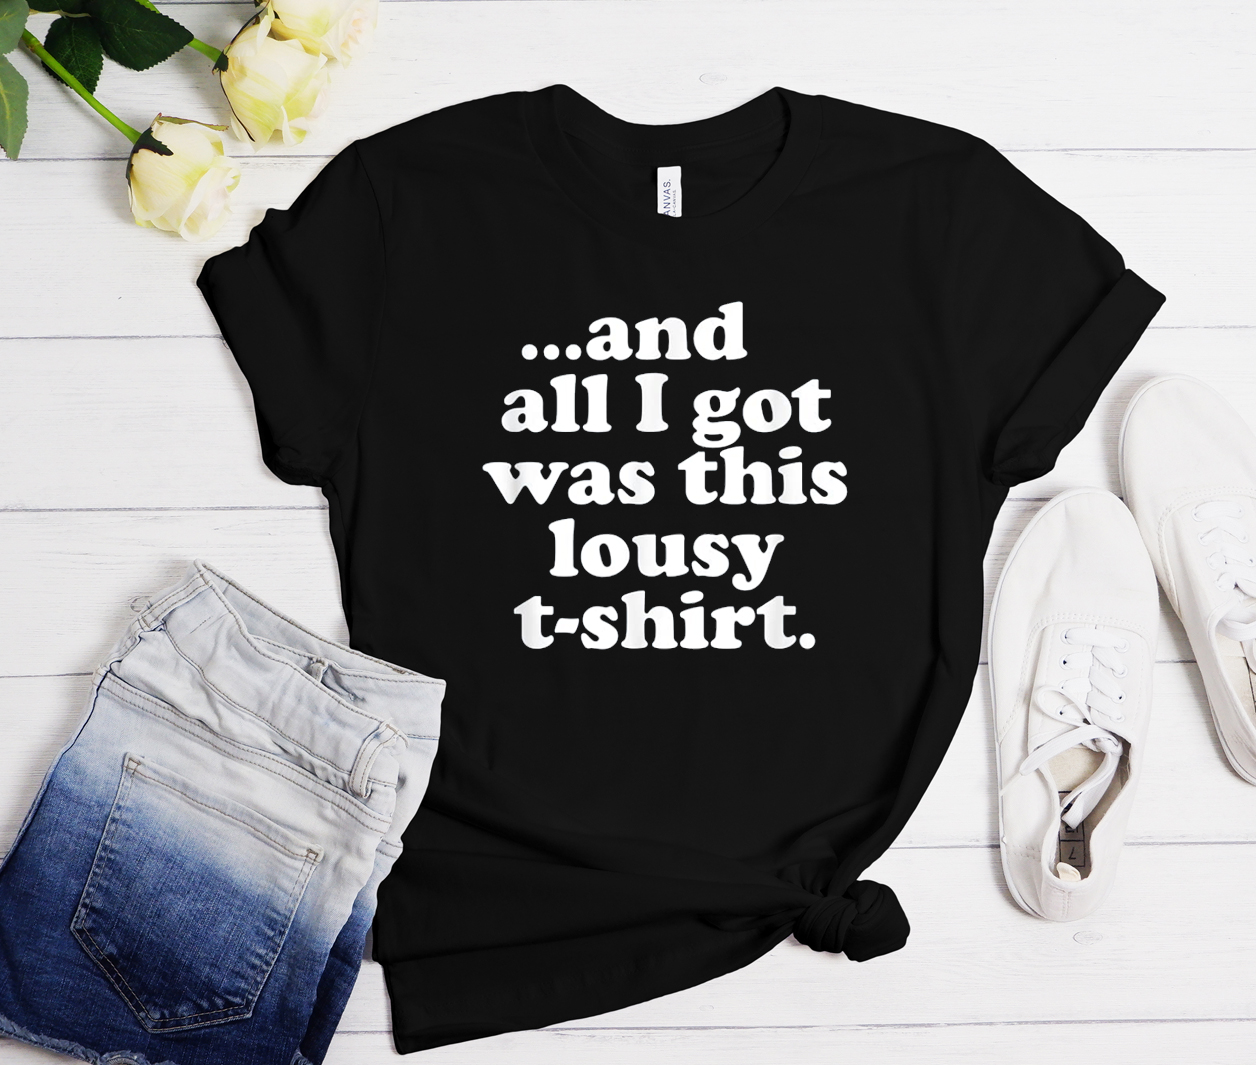 All I Got Was This Lousy T-Shirt Funny Gift Tee T-shirt